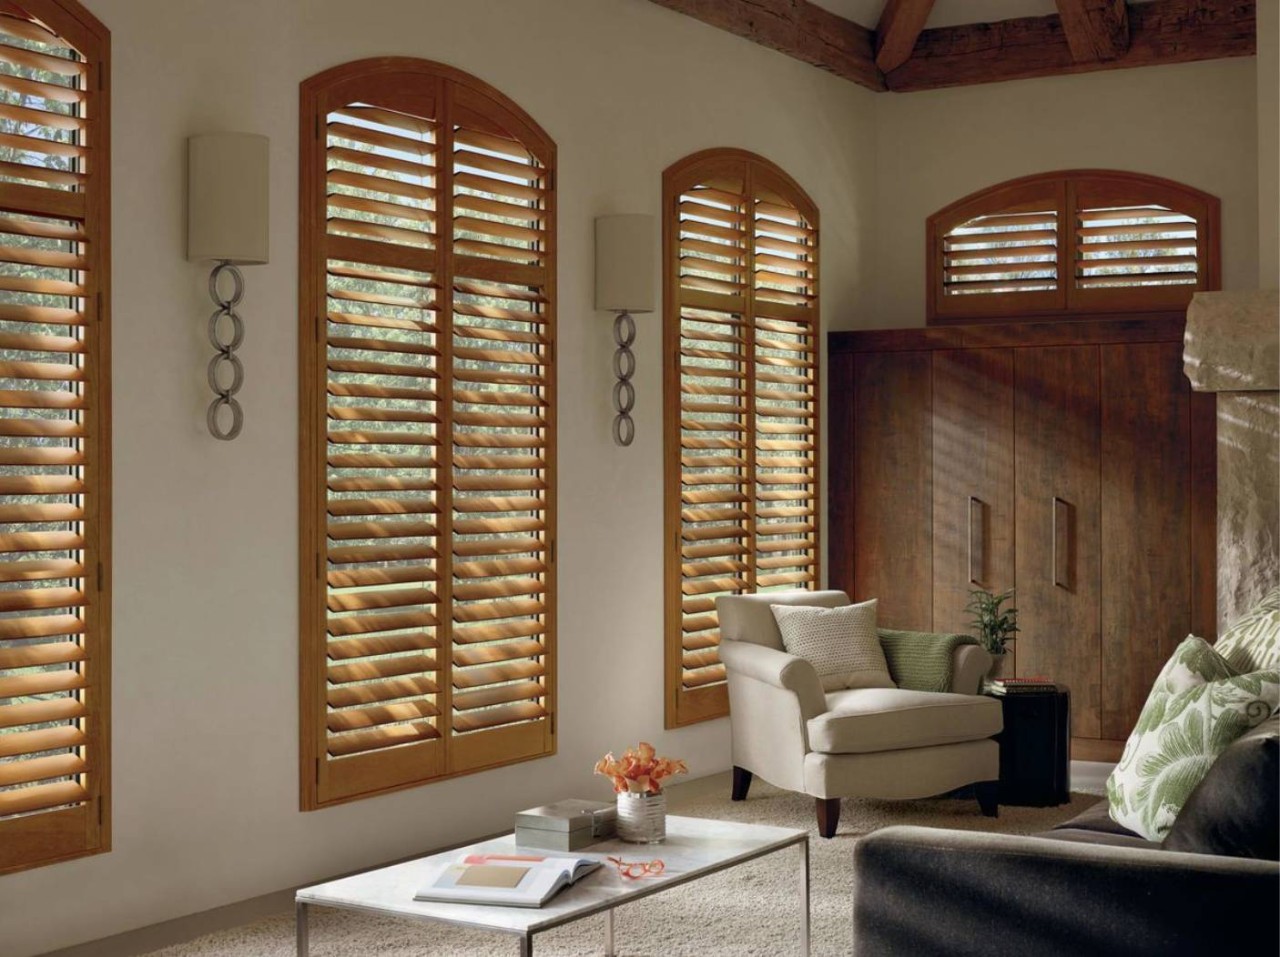 Hunter Douglas Heritance® Wood Shutters with the Louvers Open Letting in Light to a Seating Area near Arlington Heights, IL